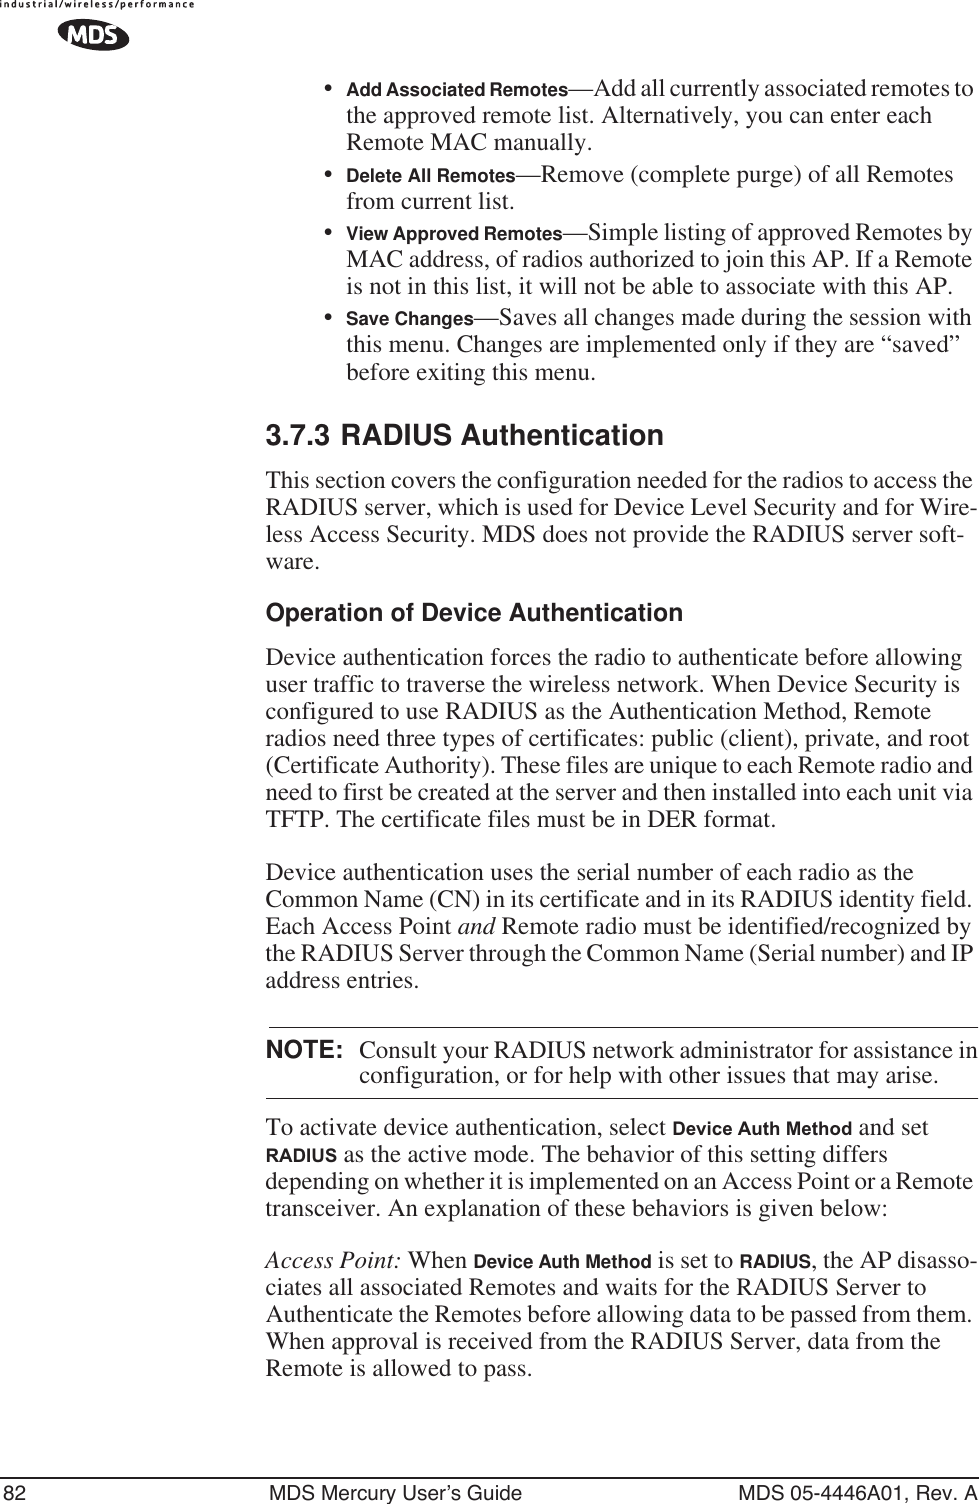 82 MDS Mercury User’s Guide MDS 05-4446A01, Rev. A•Add Associated Remotes—Add all currently associated remotes to the approved remote list. Alternatively, you can enter each Remote MAC manually.•Delete All Remotes—Remove (complete purge) of all Remotes from current list.•View Approved Remotes—Simple listing of approved Remotes by MAC address, of radios authorized to join this AP. If a Remote is not in this list, it will not be able to associate with this AP.•Save Changes—Saves all changes made during the session with this menu. Changes are implemented only if they are “saved” before exiting this menu.3.7.3 RADIUS AuthenticationThis section covers the configuration needed for the radios to access the RADIUS server, which is used for Device Level Security and for Wire-less Access Security. MDS does not provide the RADIUS server soft-ware.Operation of Device AuthenticationDevice authentication forces the radio to authenticate before allowing user traffic to traverse the wireless network. When Device Security is configured to use RADIUS as the Authentication Method, Remote radios need three types of certificates: public (client), private, and root (Certificate Authority). These files are unique to each Remote radio and need to first be created at the server and then installed into each unit via TFTP. The certificate files must be in DER format.Device authentication uses the serial number of each radio as the Common Name (CN) in its certificate and in its RADIUS identity field. Each Access Point and Remote radio must be identified/recognized by the RADIUS Server through the Common Name (Serial number) and IP address entries.NOTE: Consult your RADIUS network administrator for assistance inconfiguration, or for help with other issues that may arise.To activate device authentication, select Device Auth Method and set RADIUS as the active mode. The behavior of this setting differs depending on whether it is implemented on an Access Point or a Remote transceiver. An explanation of these behaviors is given below:Access Point: When Device Auth Method is set to RADIUS, the AP disasso-ciates all associated Remotes and waits for the RADIUS Server to Authenticate the Remotes before allowing data to be passed from them. When approval is received from the RADIUS Server, data from the Remote is allowed to pass.